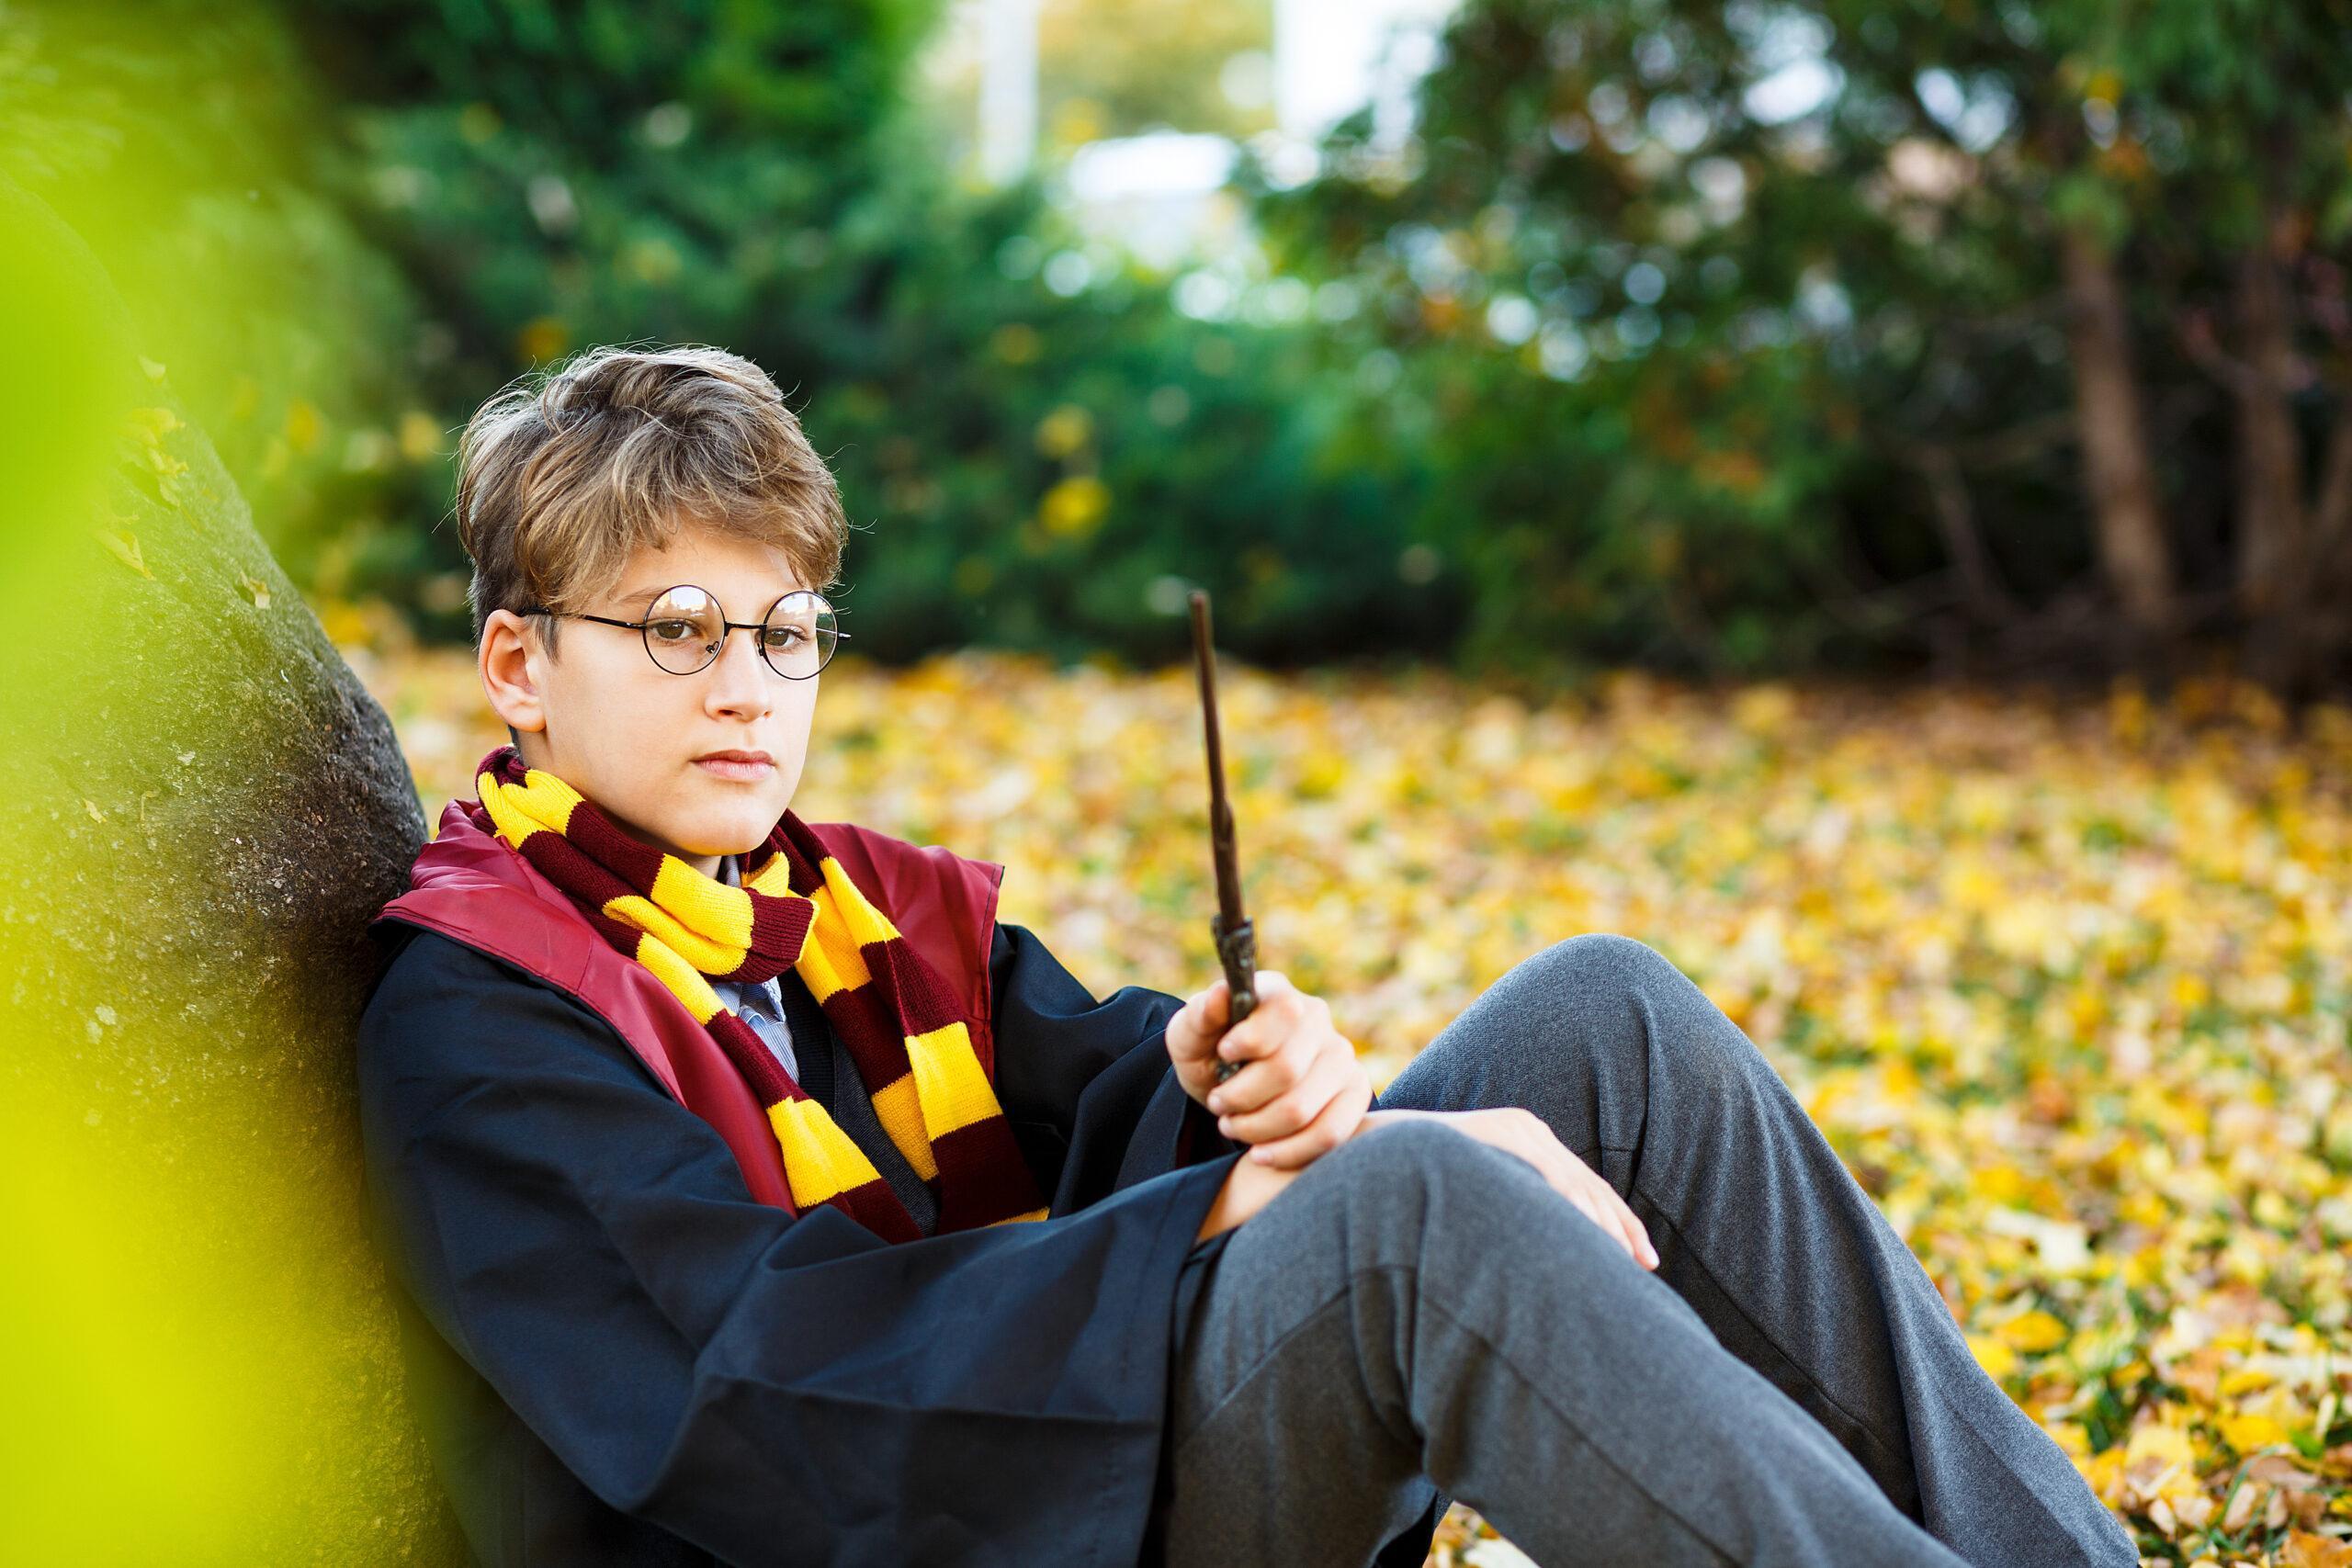 A Harry Potter fan sitting by a tree holding a wand 